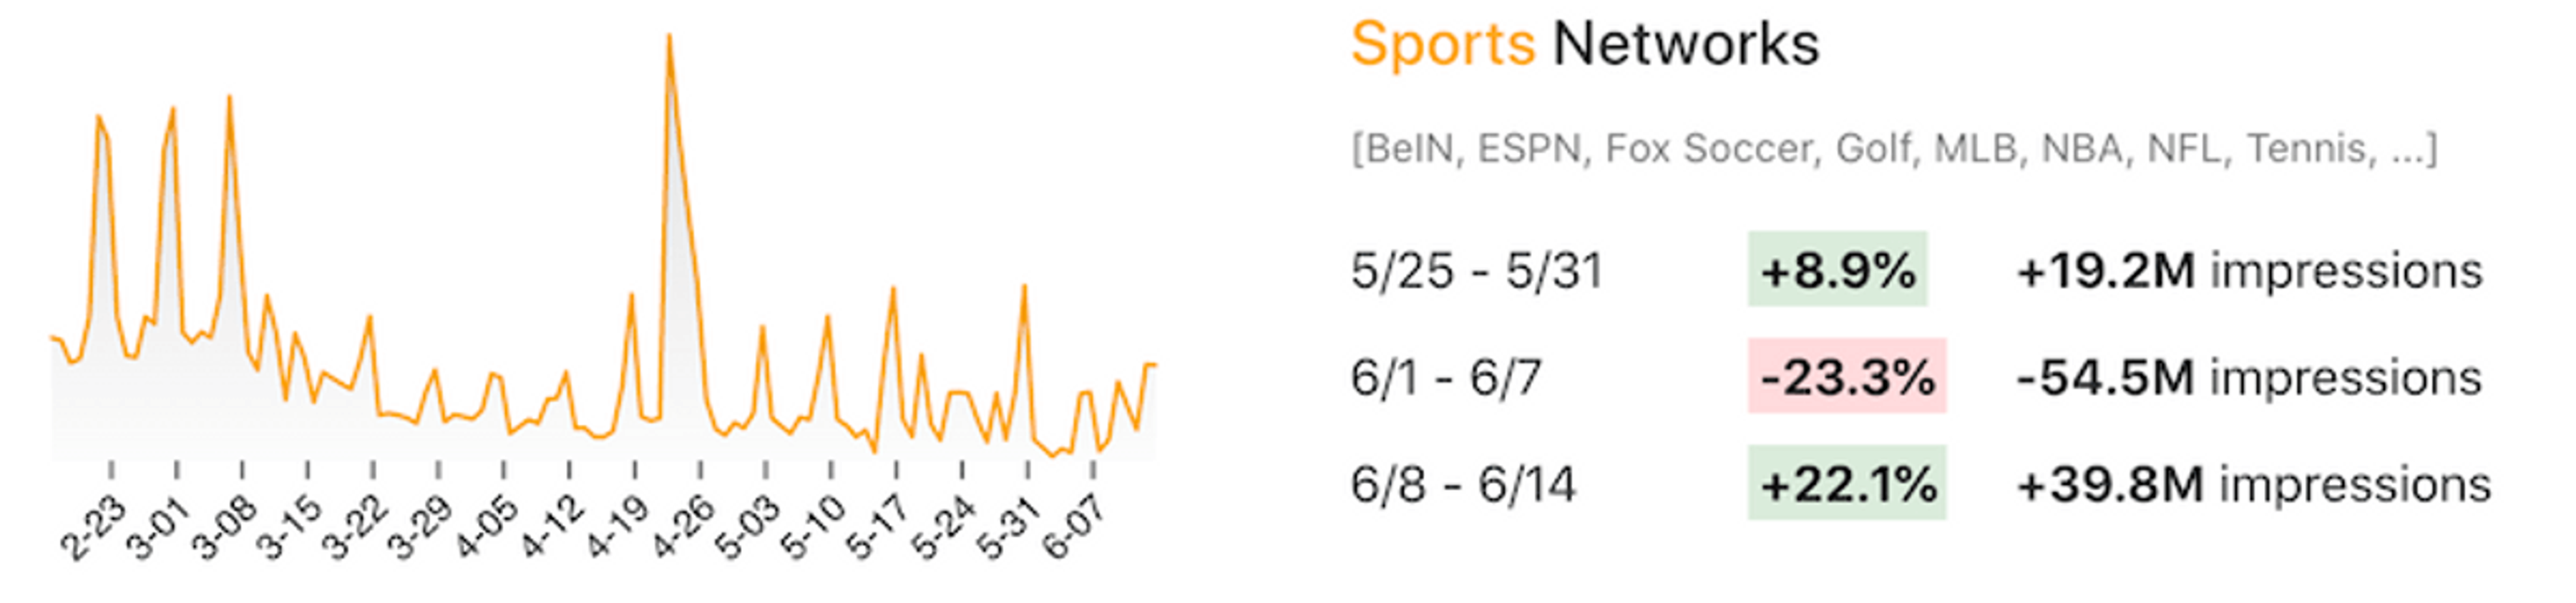 Line chart showing viewership changes for sports networks like ESPN, Fox Soccer, Golf, etc.